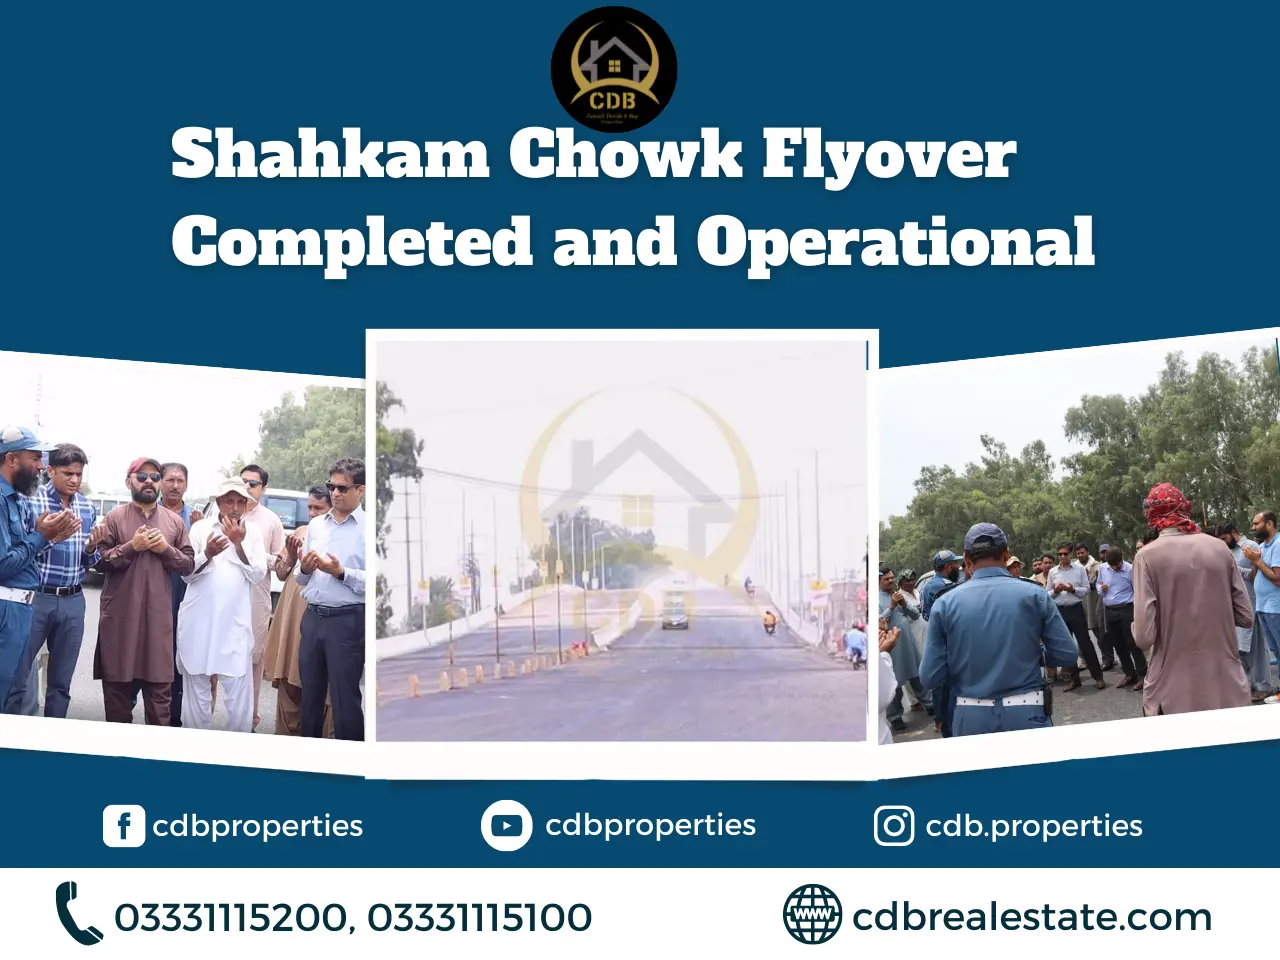 Shahkam Chowk Flyover Completed and Operational